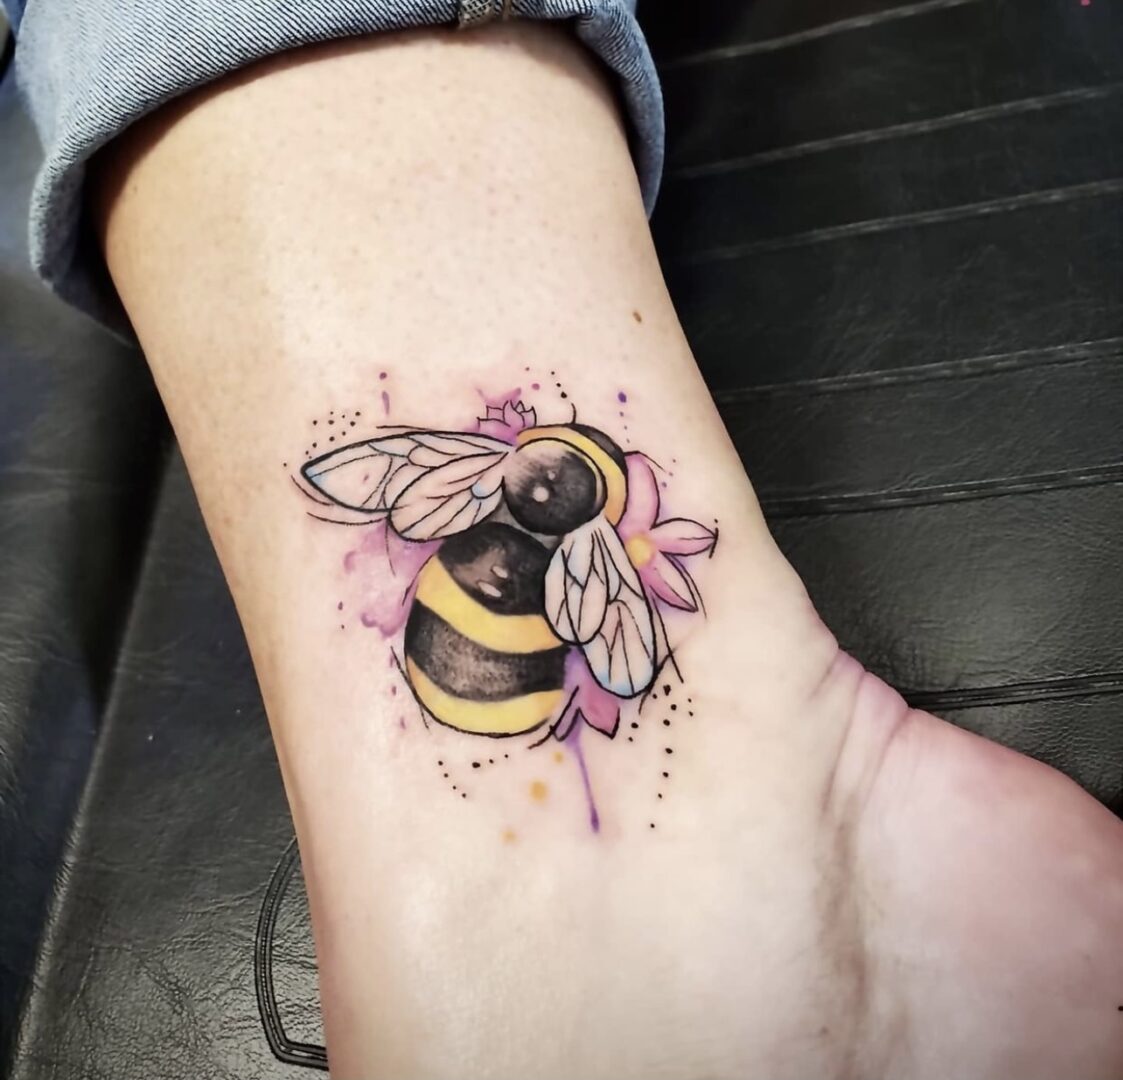 A bee tattoo on the ankle of someone.